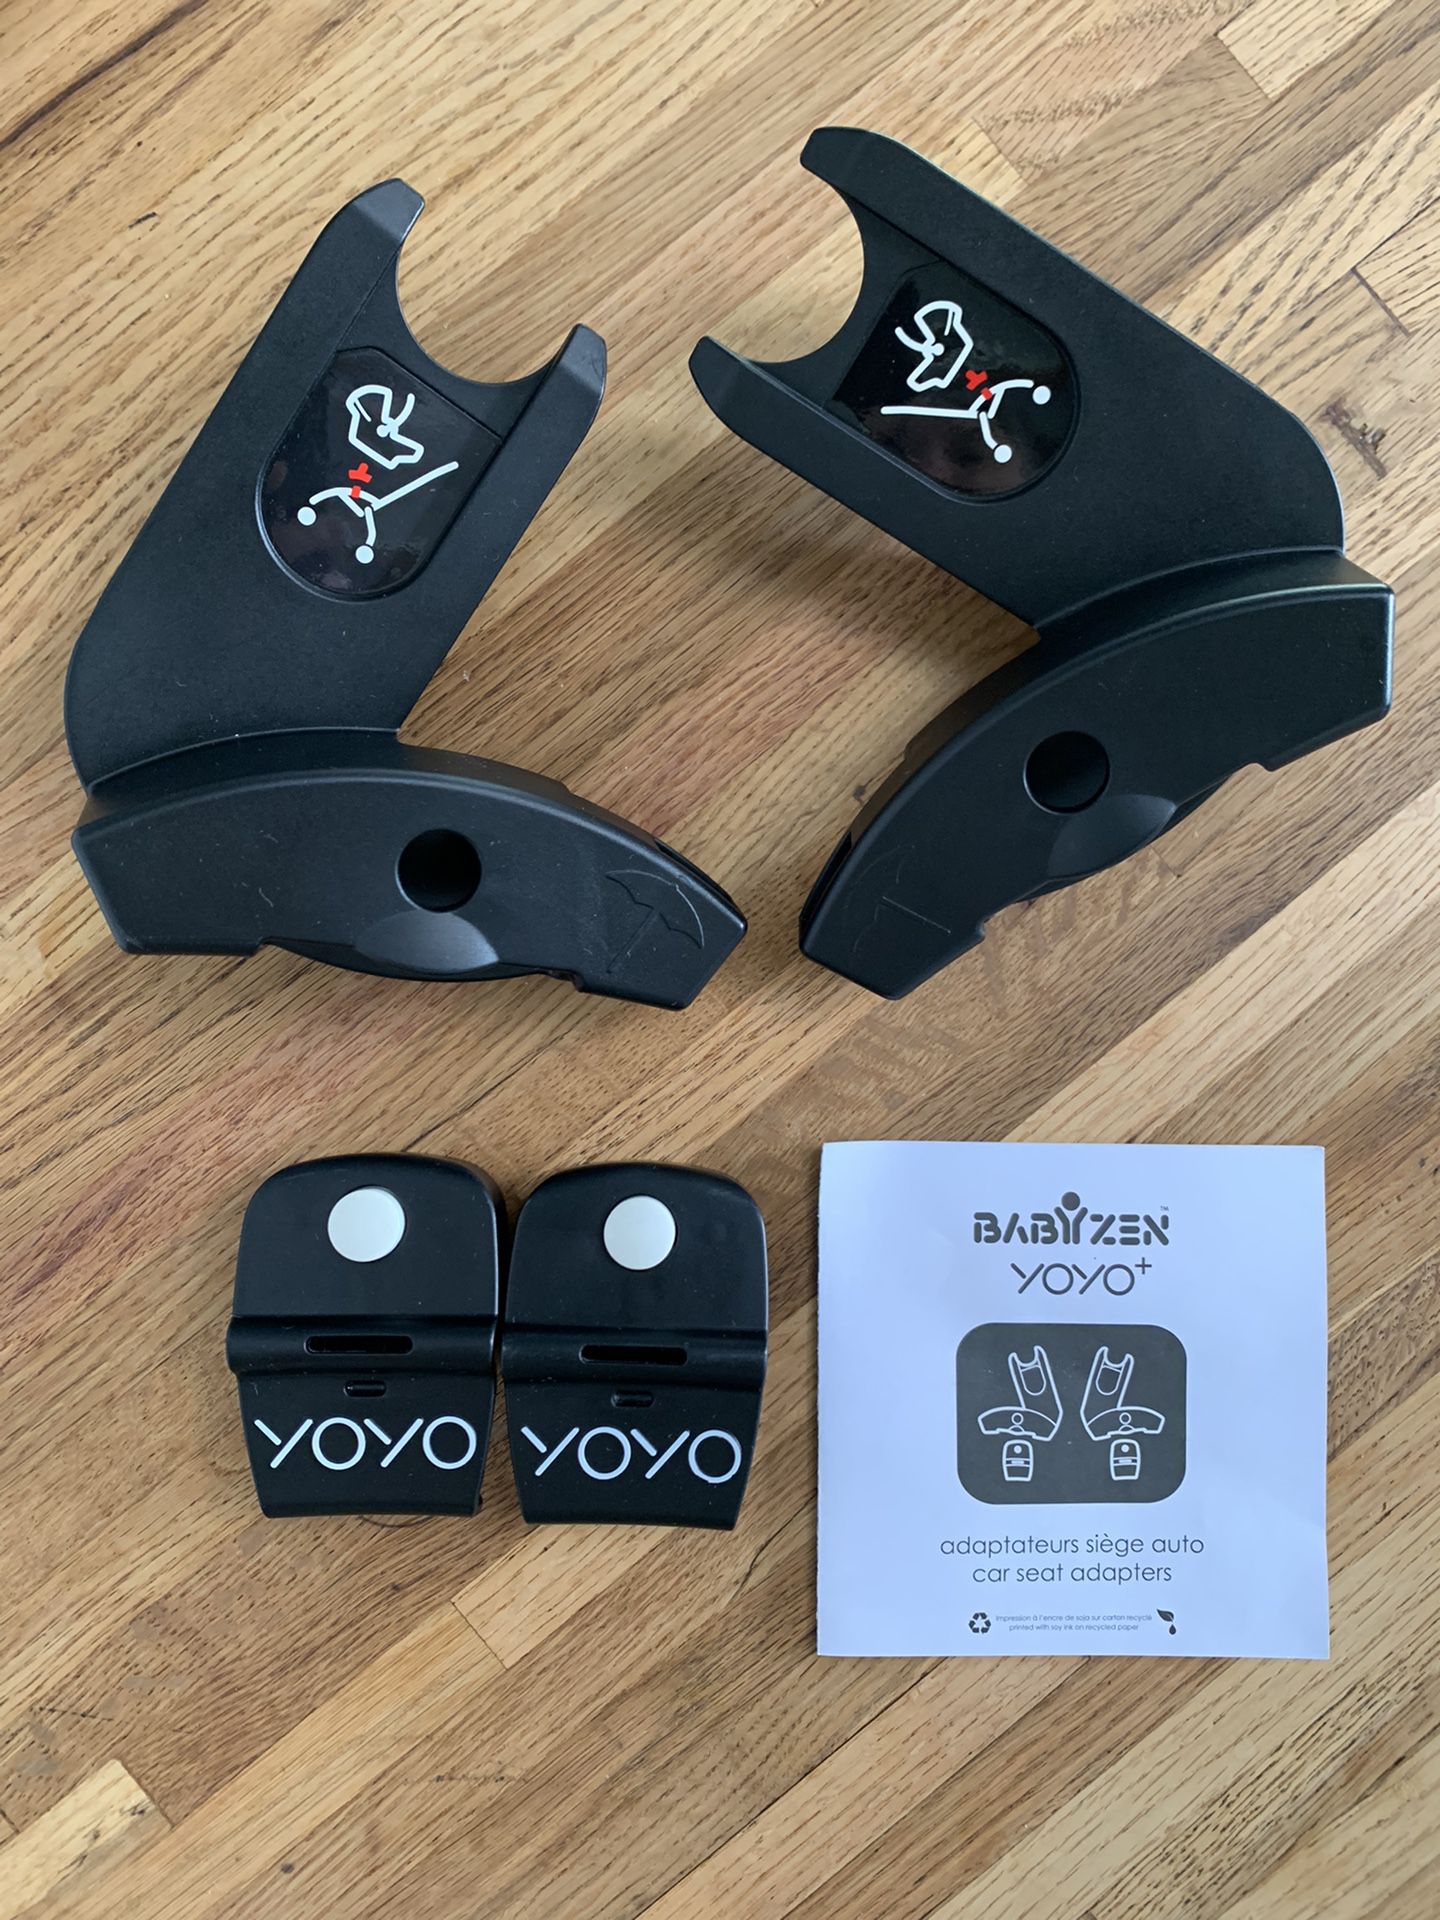 BabyZen YoYo+ Car Seat Adapters with Instructions in Box